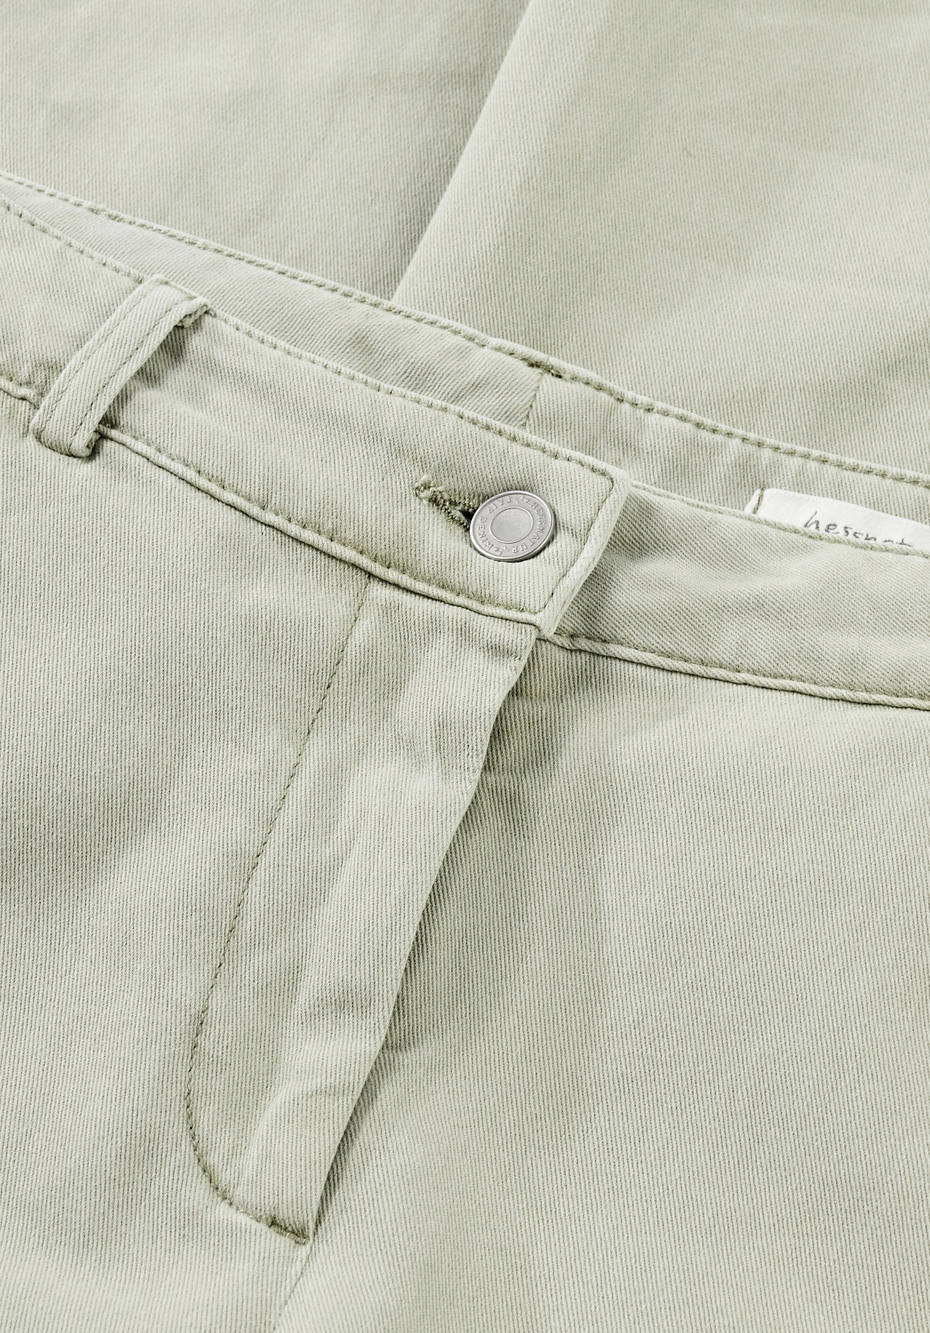 Limited by Nature pants made of mineral-dyed organic cotton